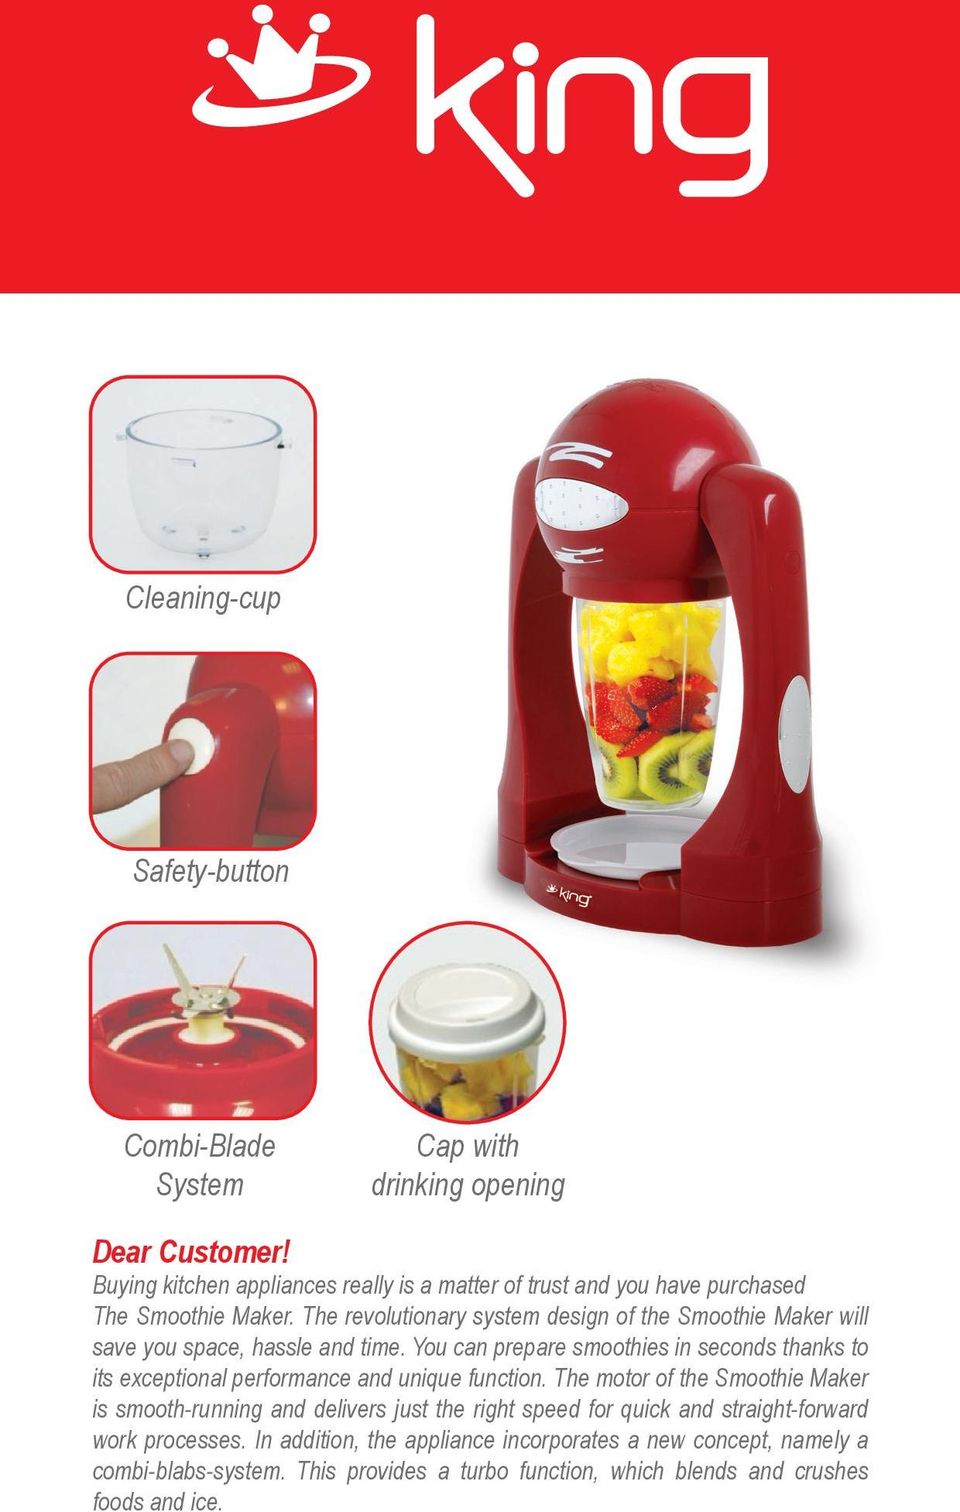 The revolutionary system design of the Smoothie Maker will save you space, hassle and time.